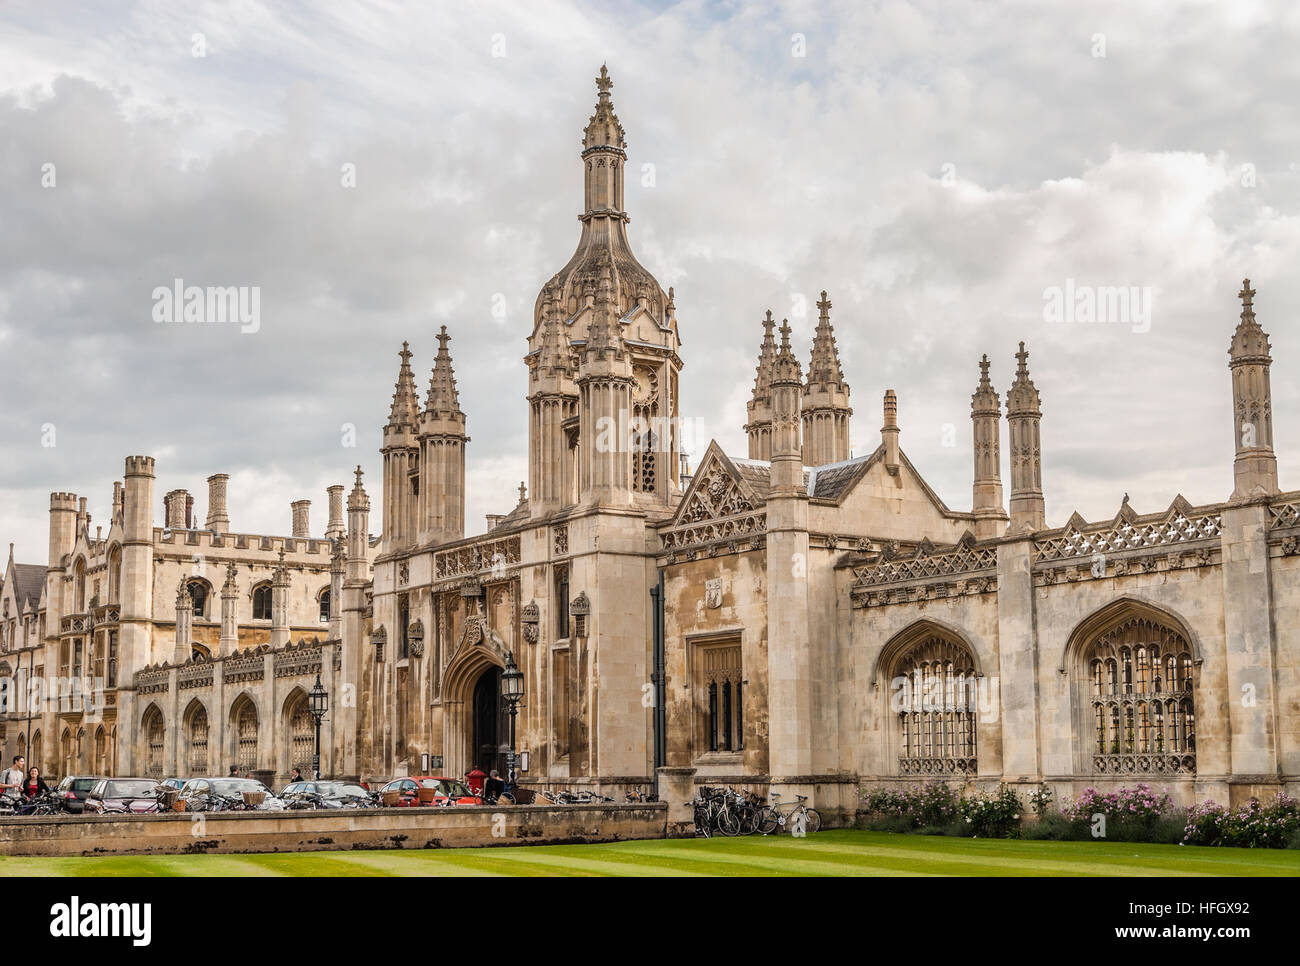 King's College Gate House at the University City Cambridge, England Stock Photo